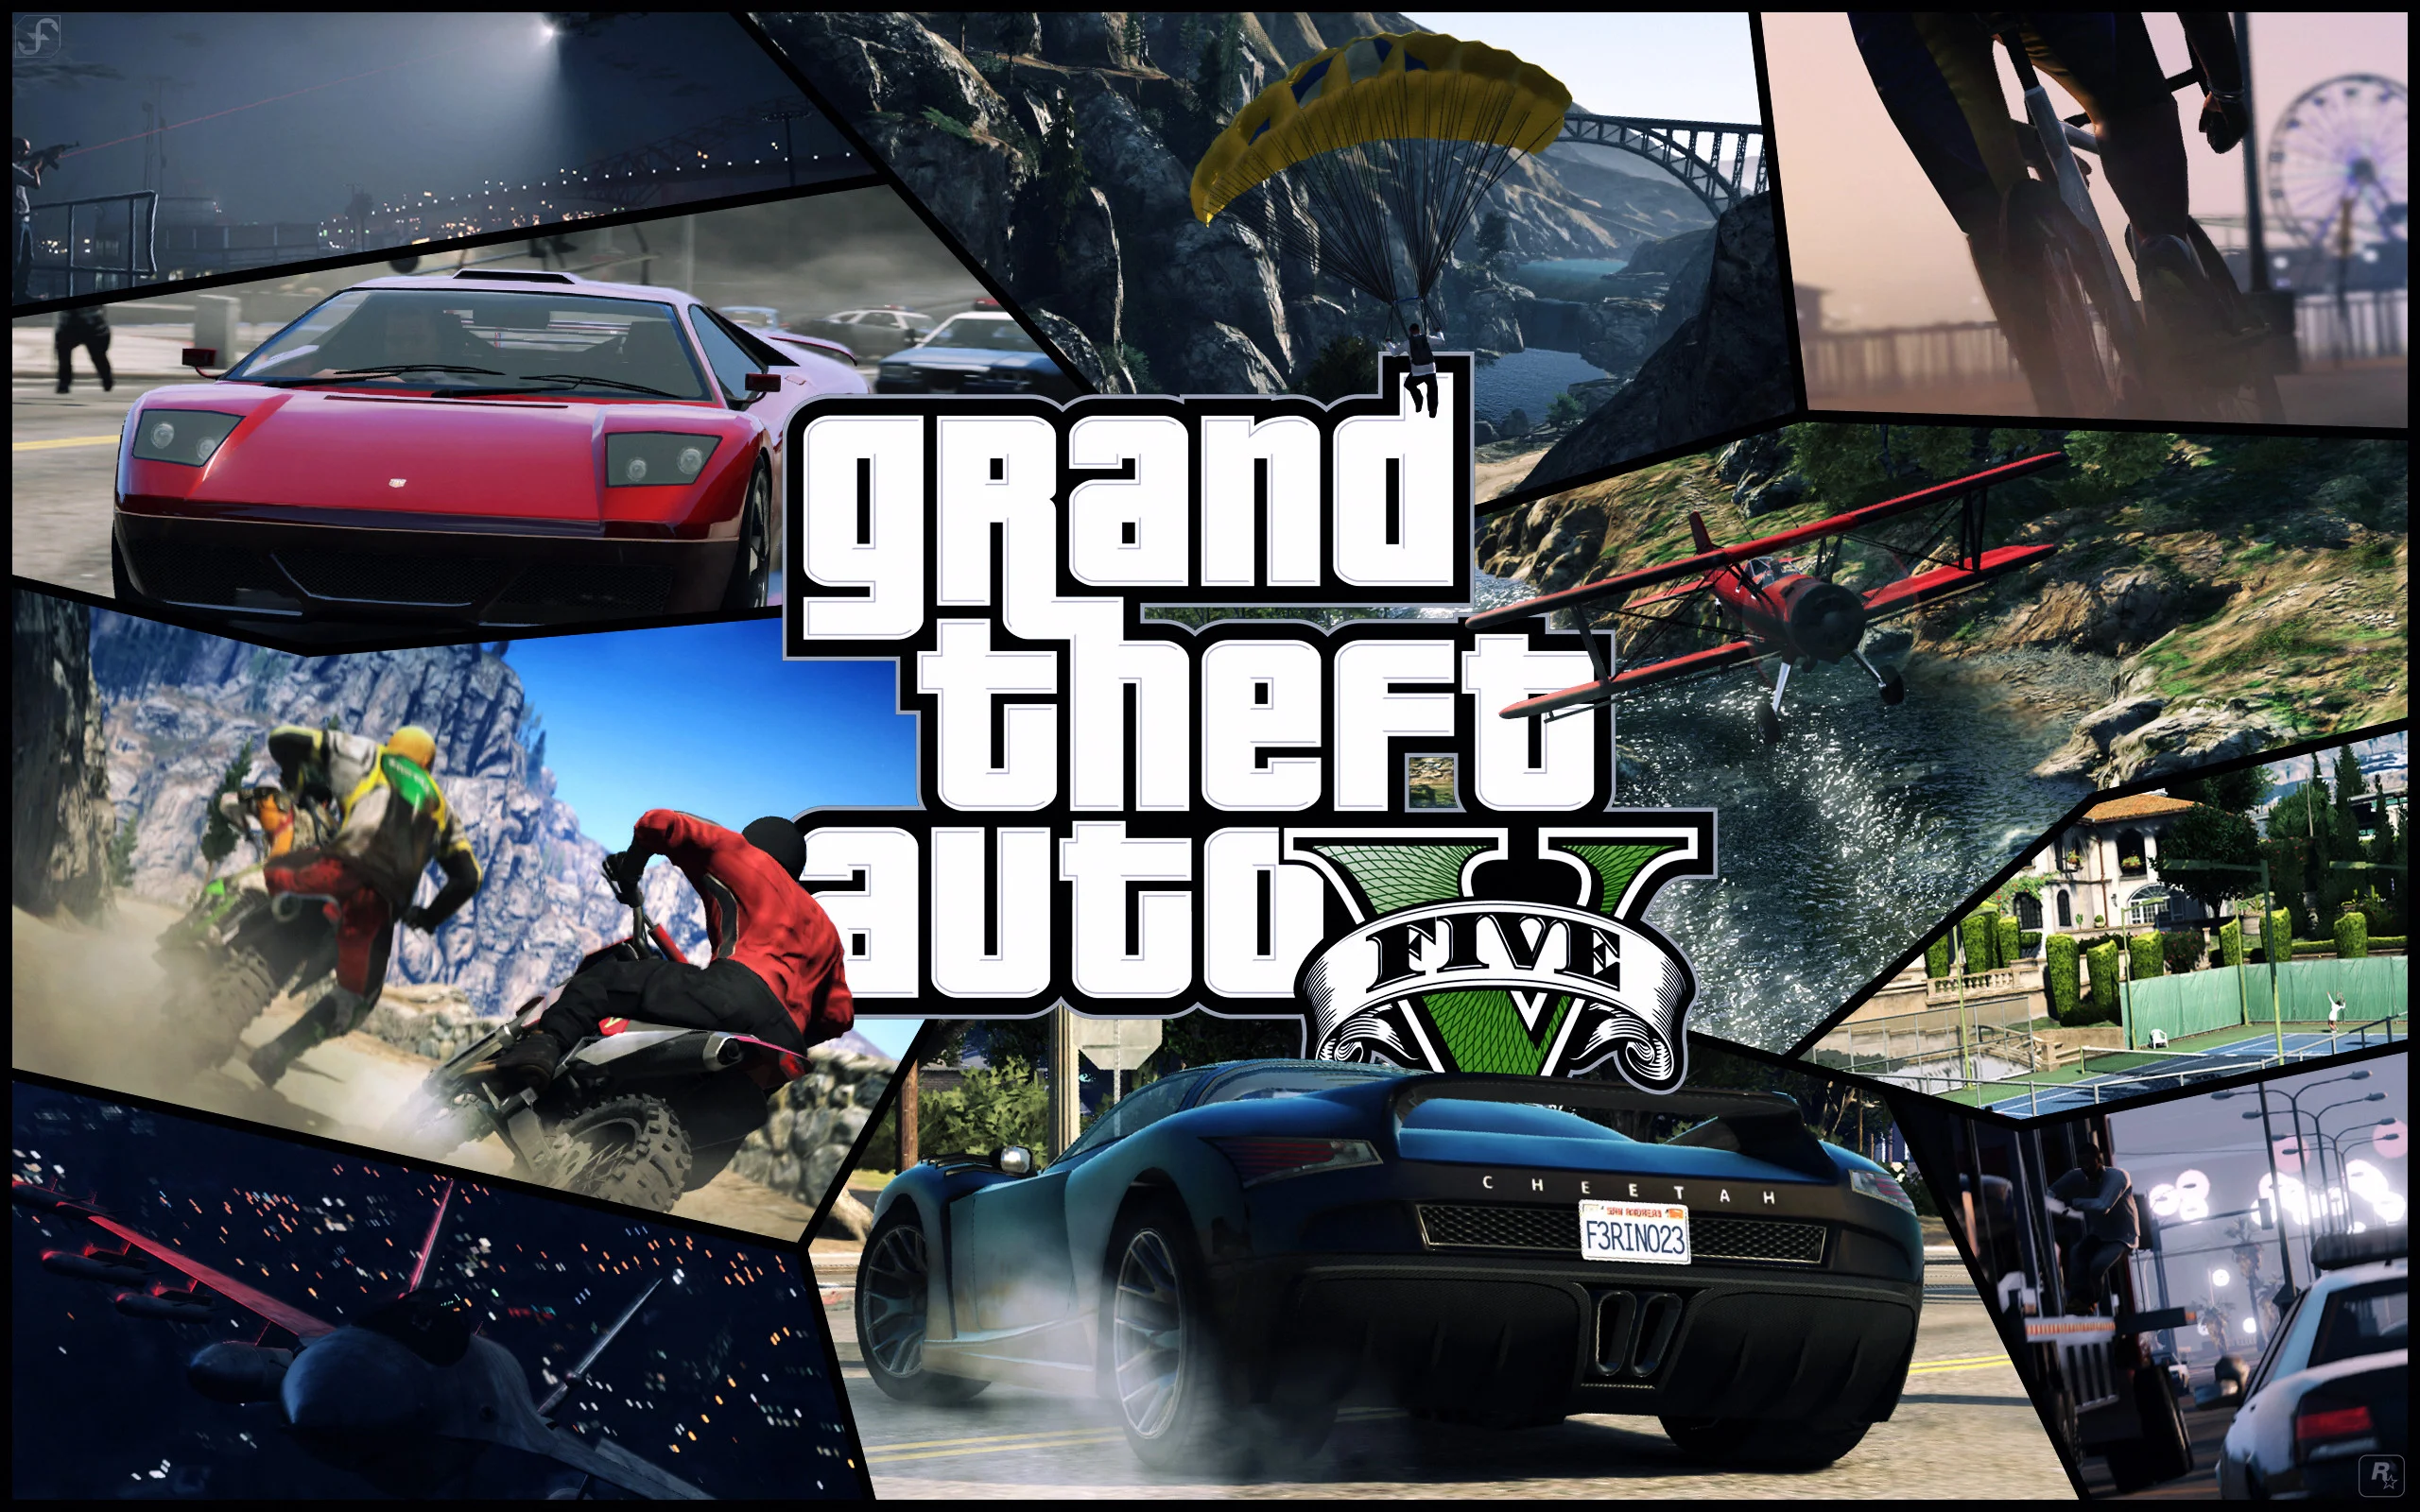 … Top Collection of GTA 5 HD Wallpapers, Gta 5 Wallpaper Hd, Pack V.